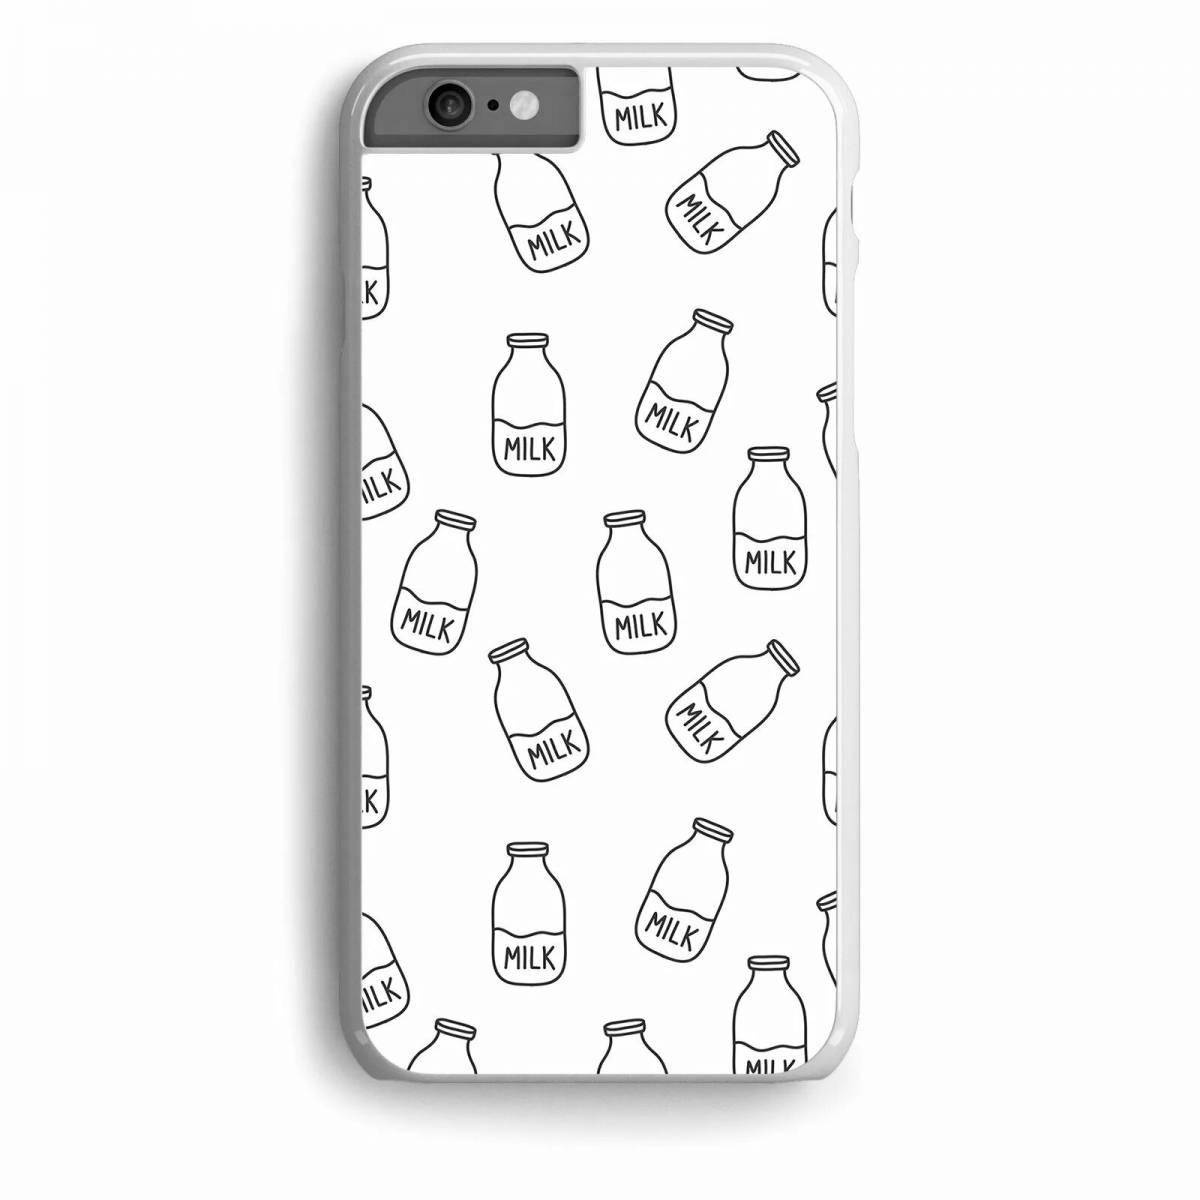 Colouring brightly designed phone case